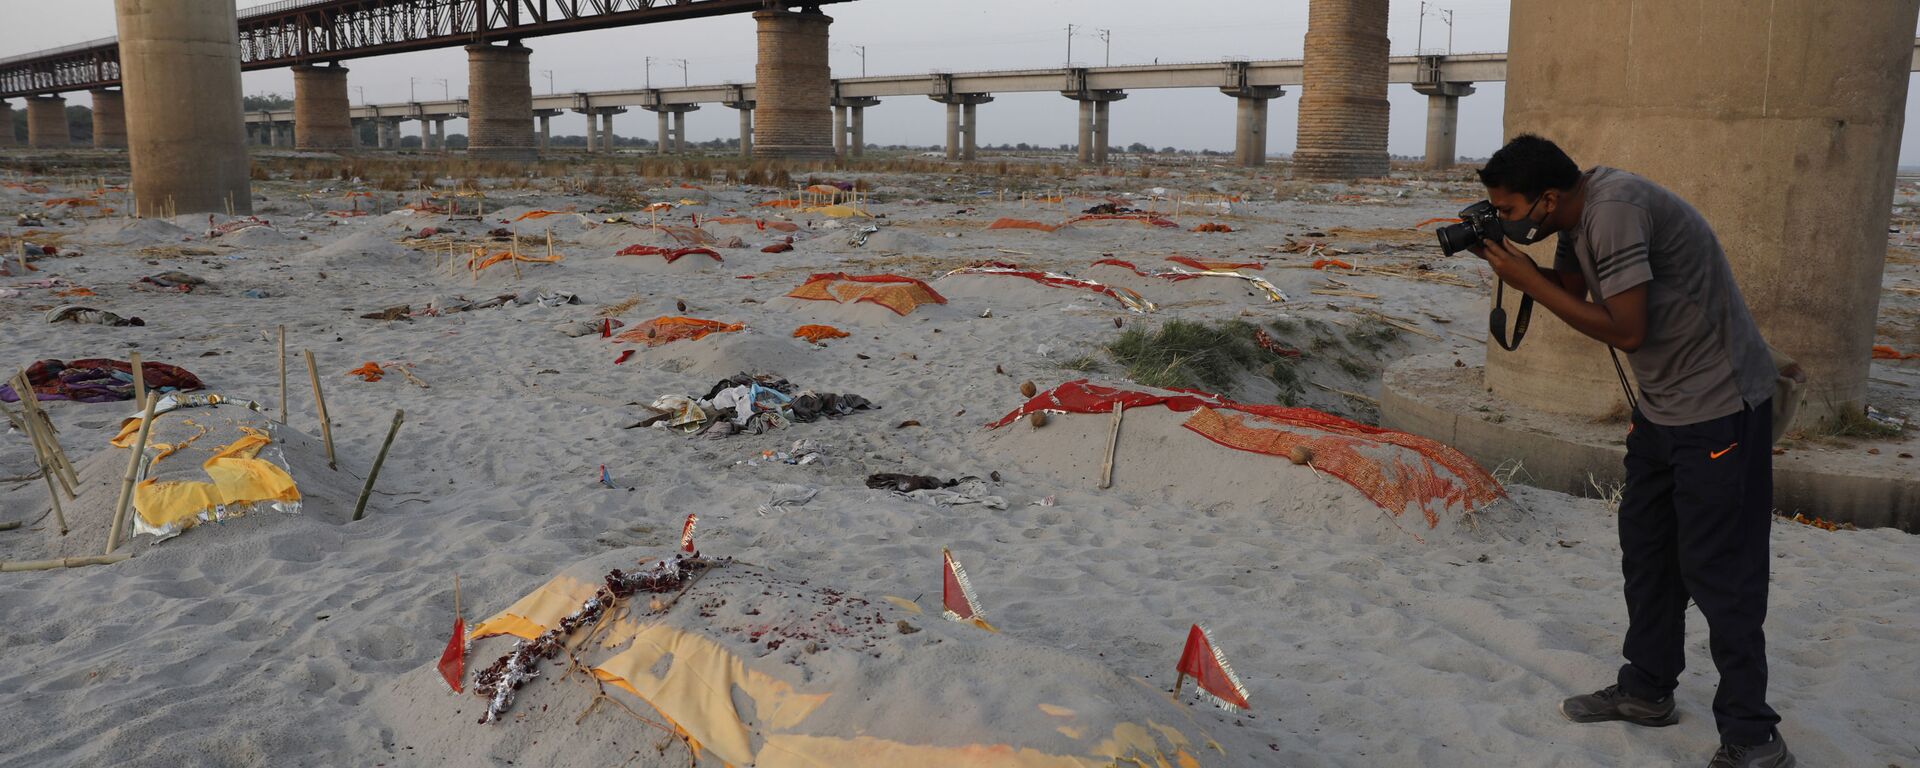 Bodies of suspected Covid-19 victims are seen in shallow graves buried in the sand near a cremation ground on the banks of Ganges River in Prayagraj, India, Saturday, May 15, 2021 - Sputnik International, 1920, 25.06.2021